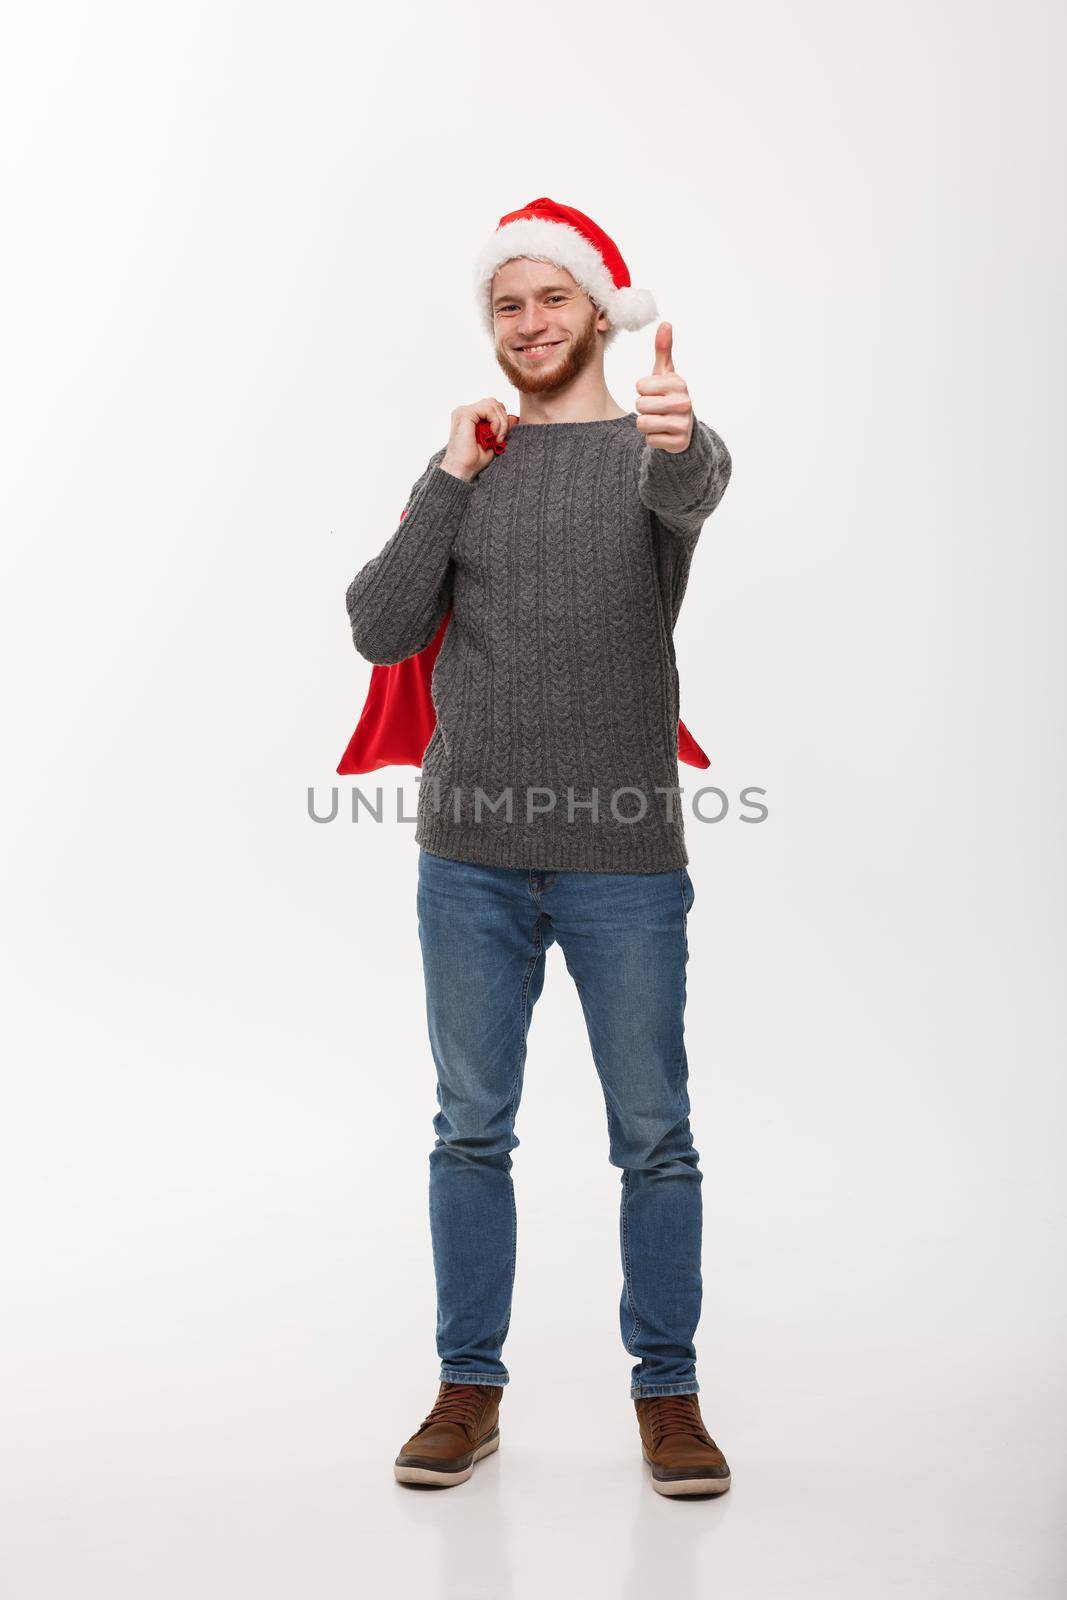 Christmas concept - Young confident smart man holding red big santa bag and giving thumb up.